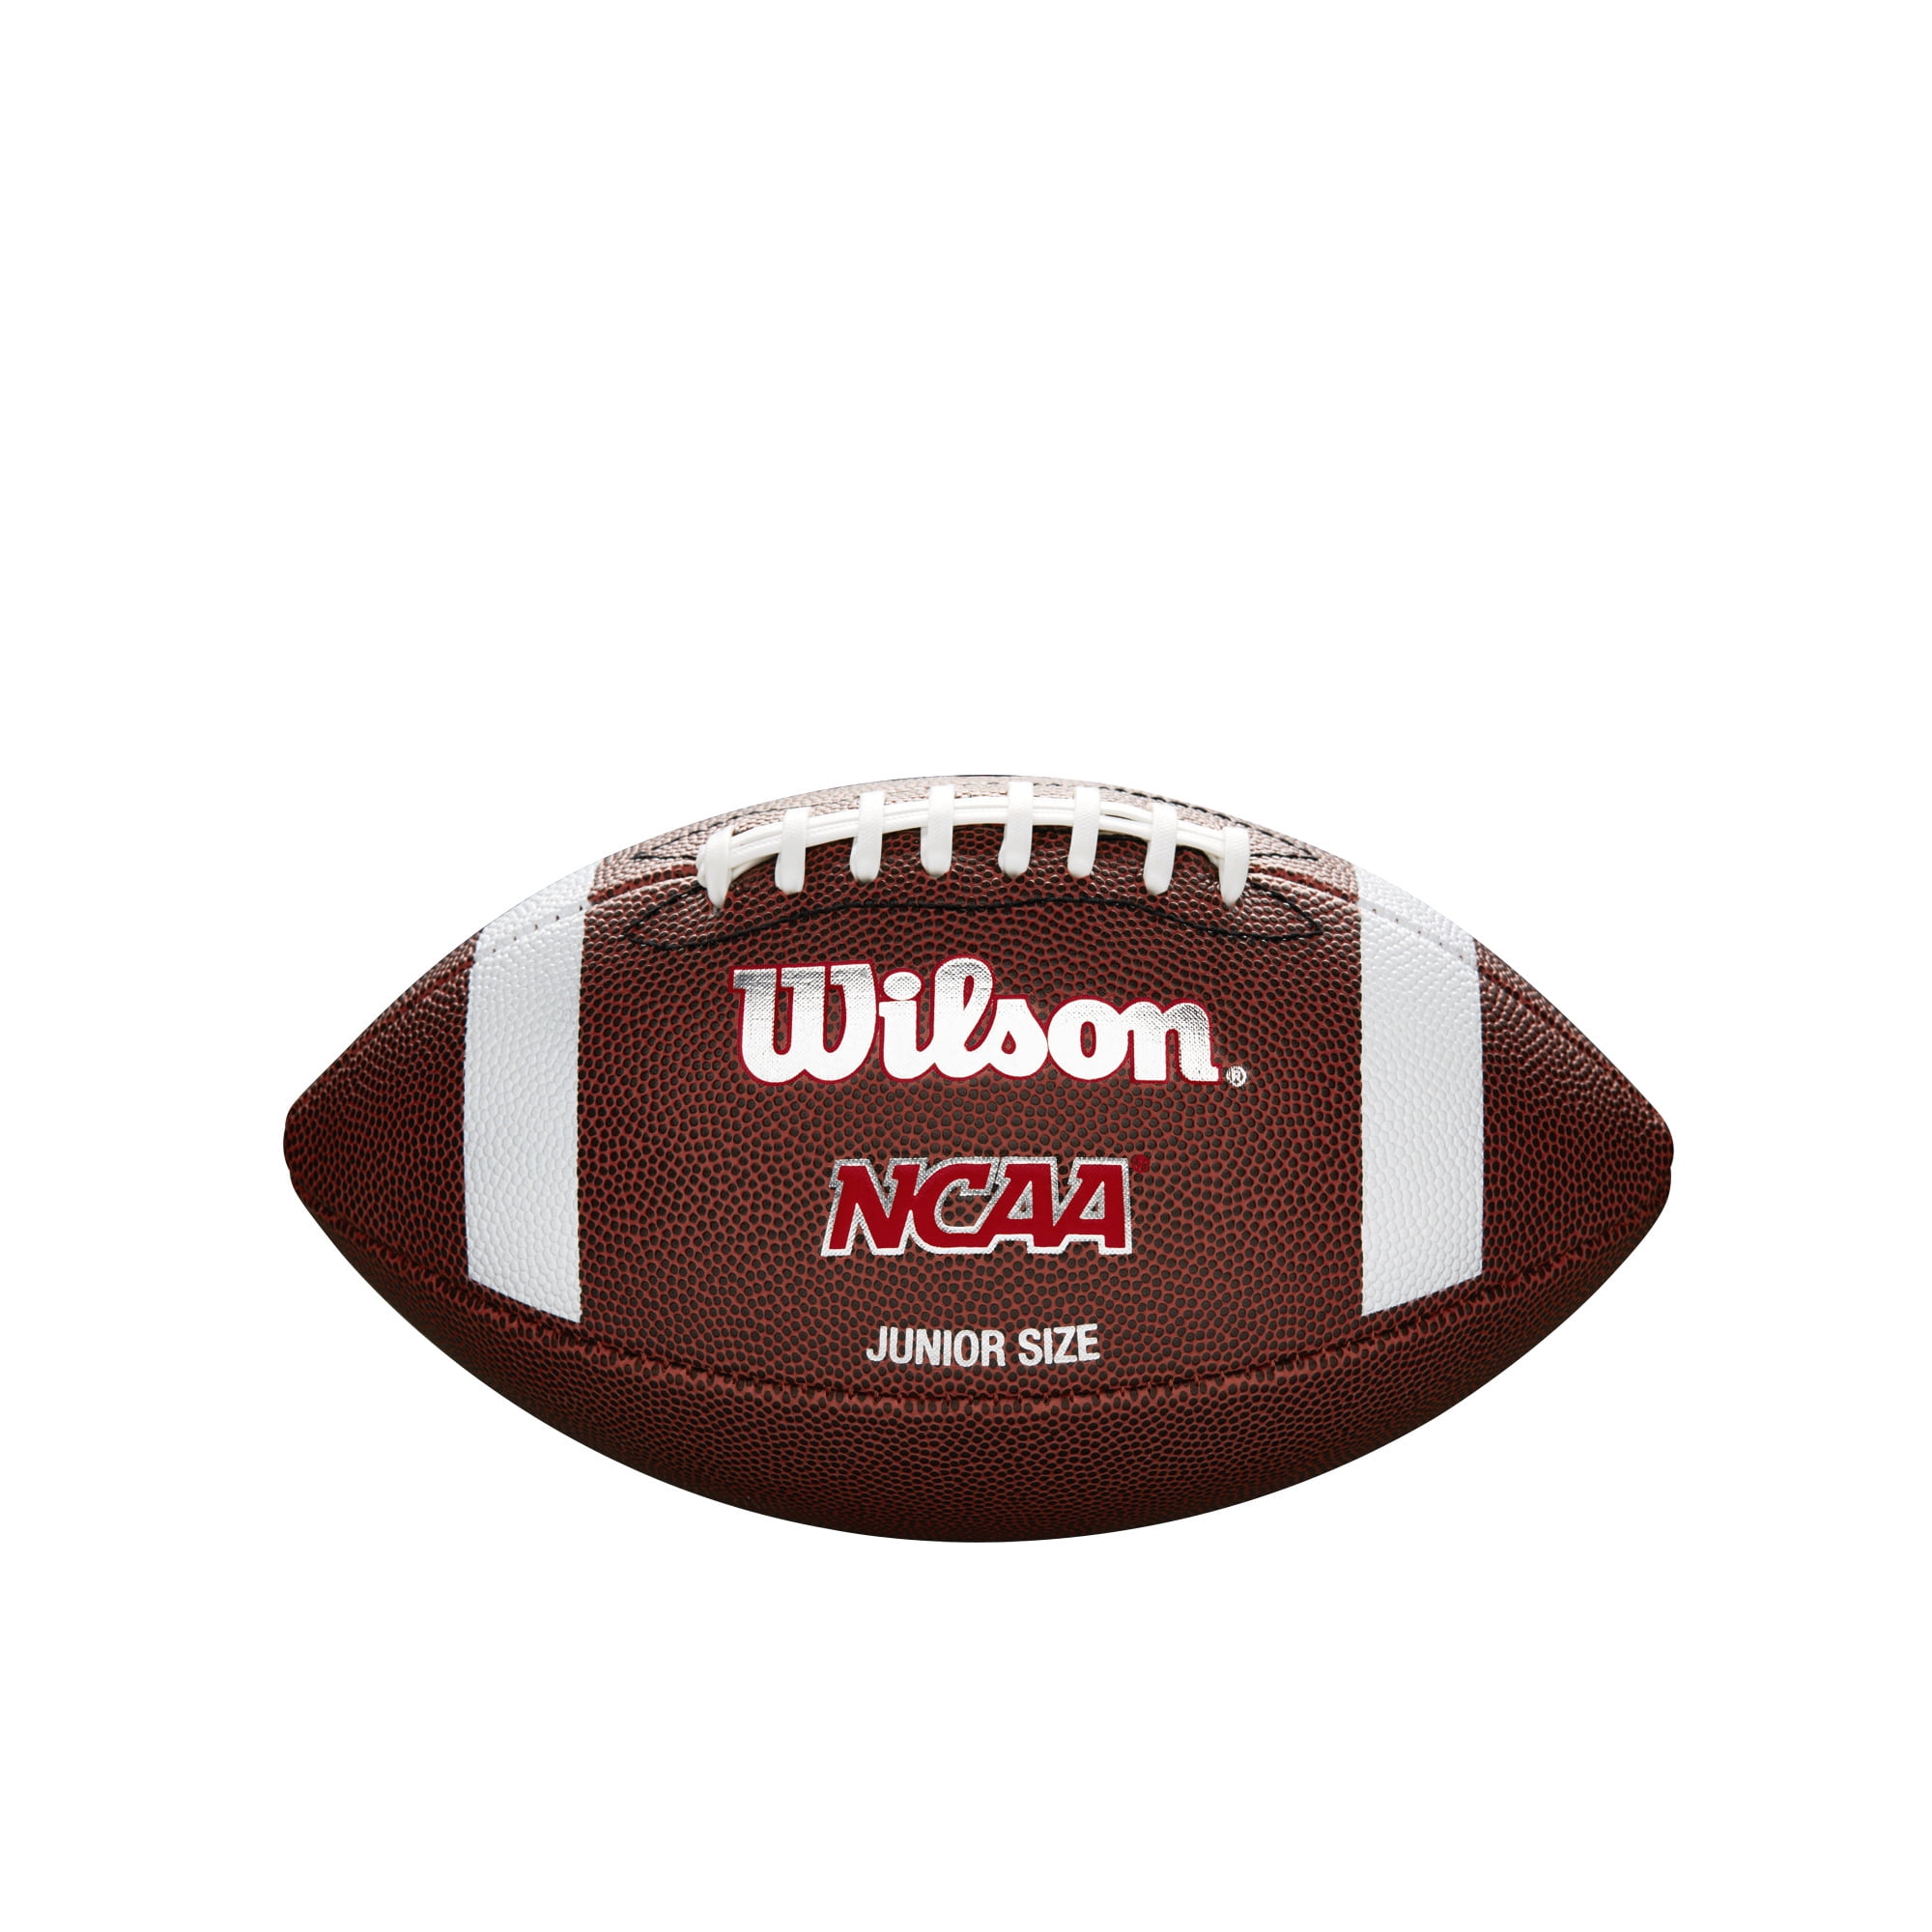 Wilson NCAA Red Zone Composite Football, Junior Size Ages 9-12